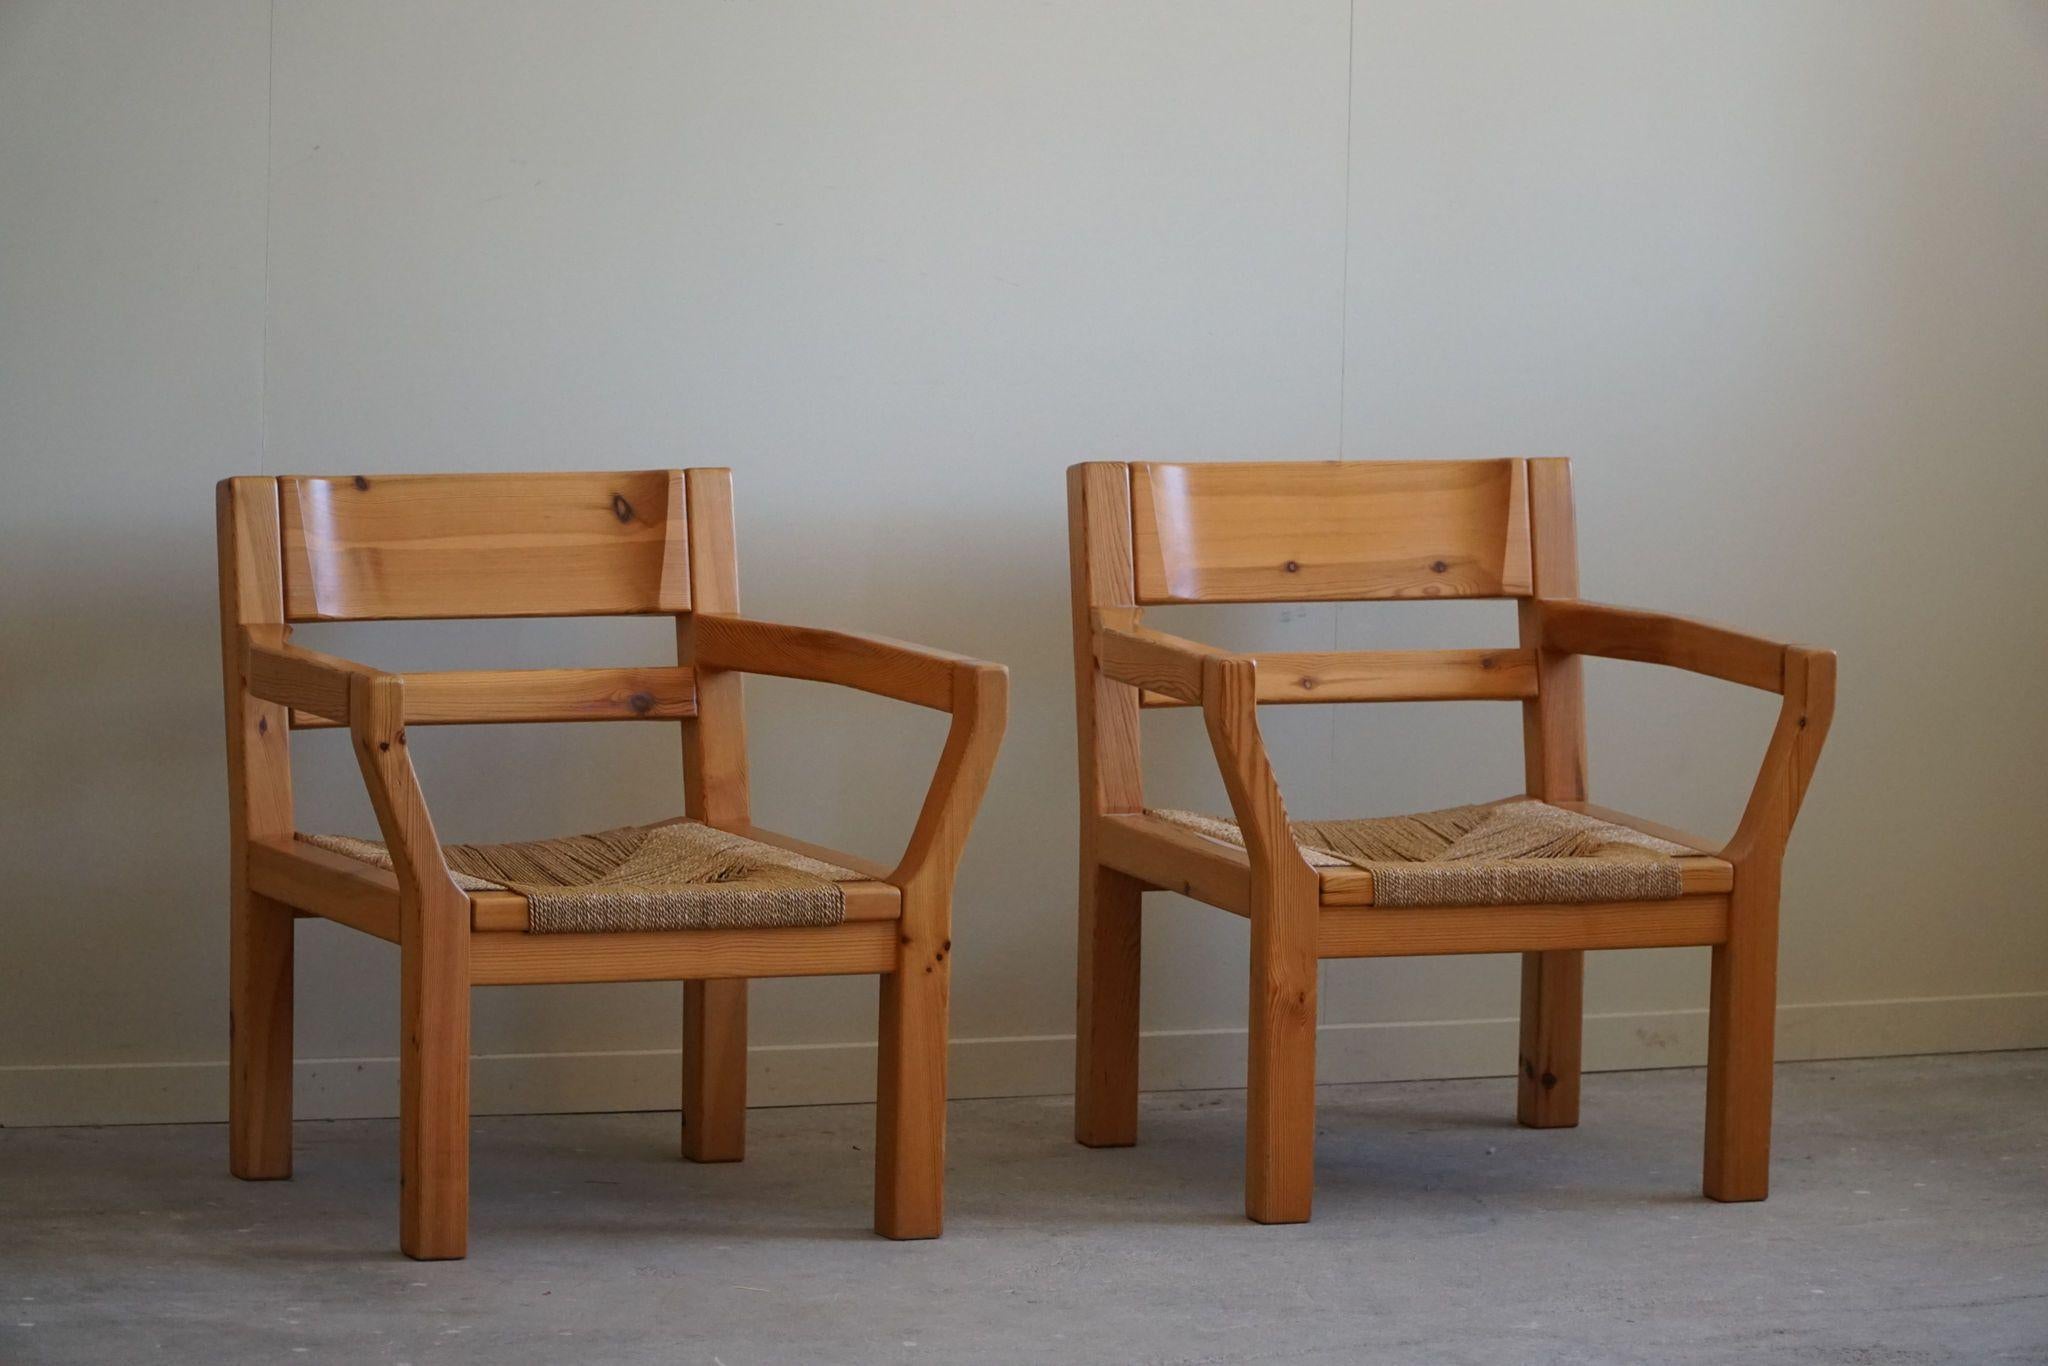 Tage Poulsen, A Pair of Brutalist Chairs in Pine & Cord, Danish Modern, 1970s For Sale 8